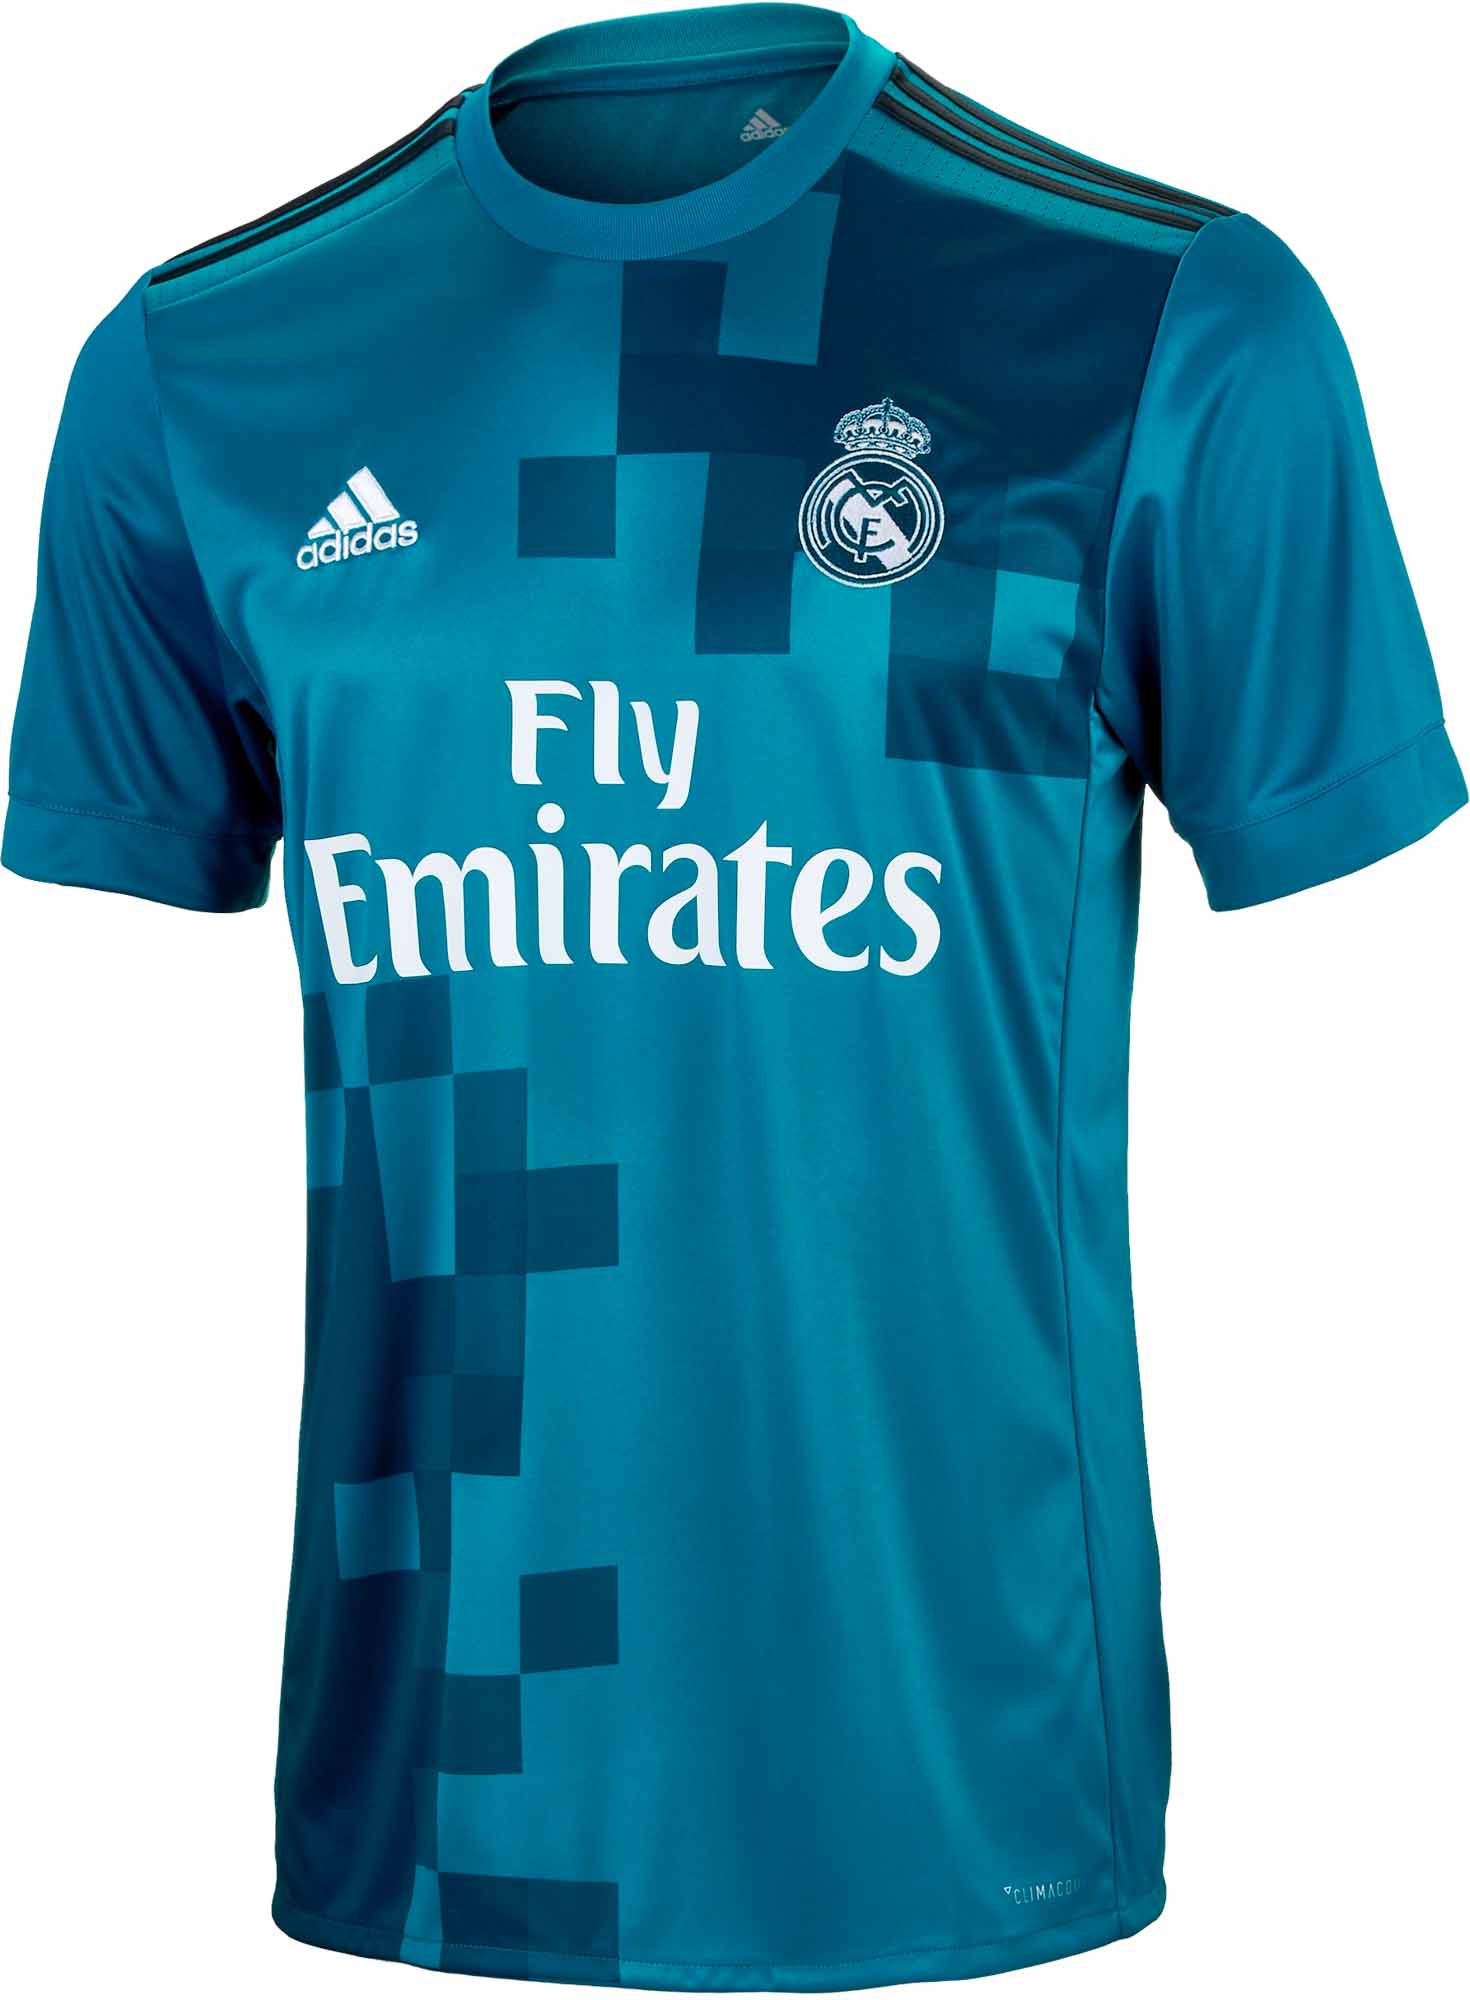 teal soccer jersey